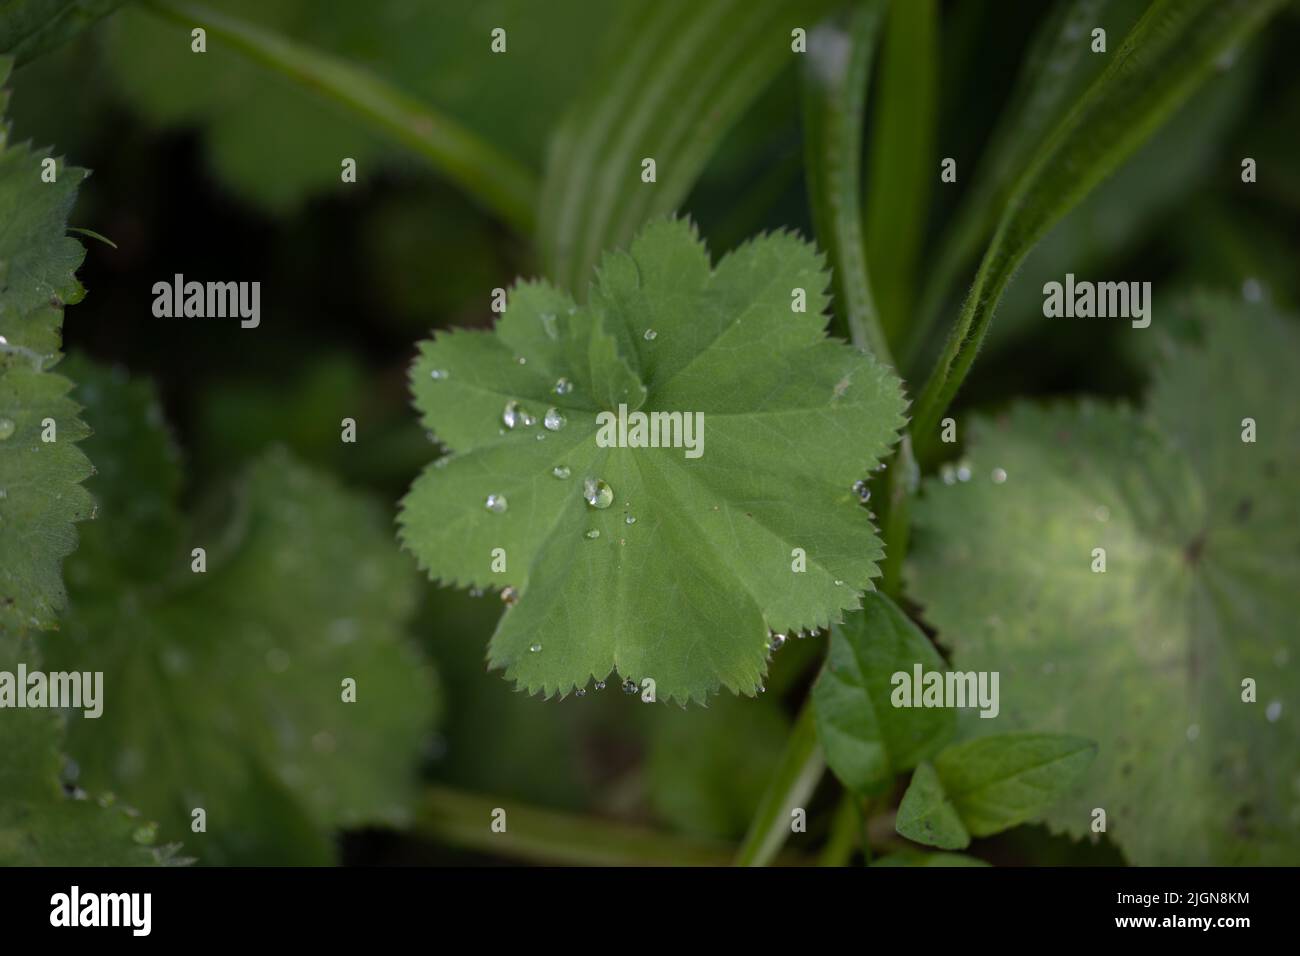 Lady's Mantle (Alchemilla mollis) with beads of water on the leaves Stock Photo